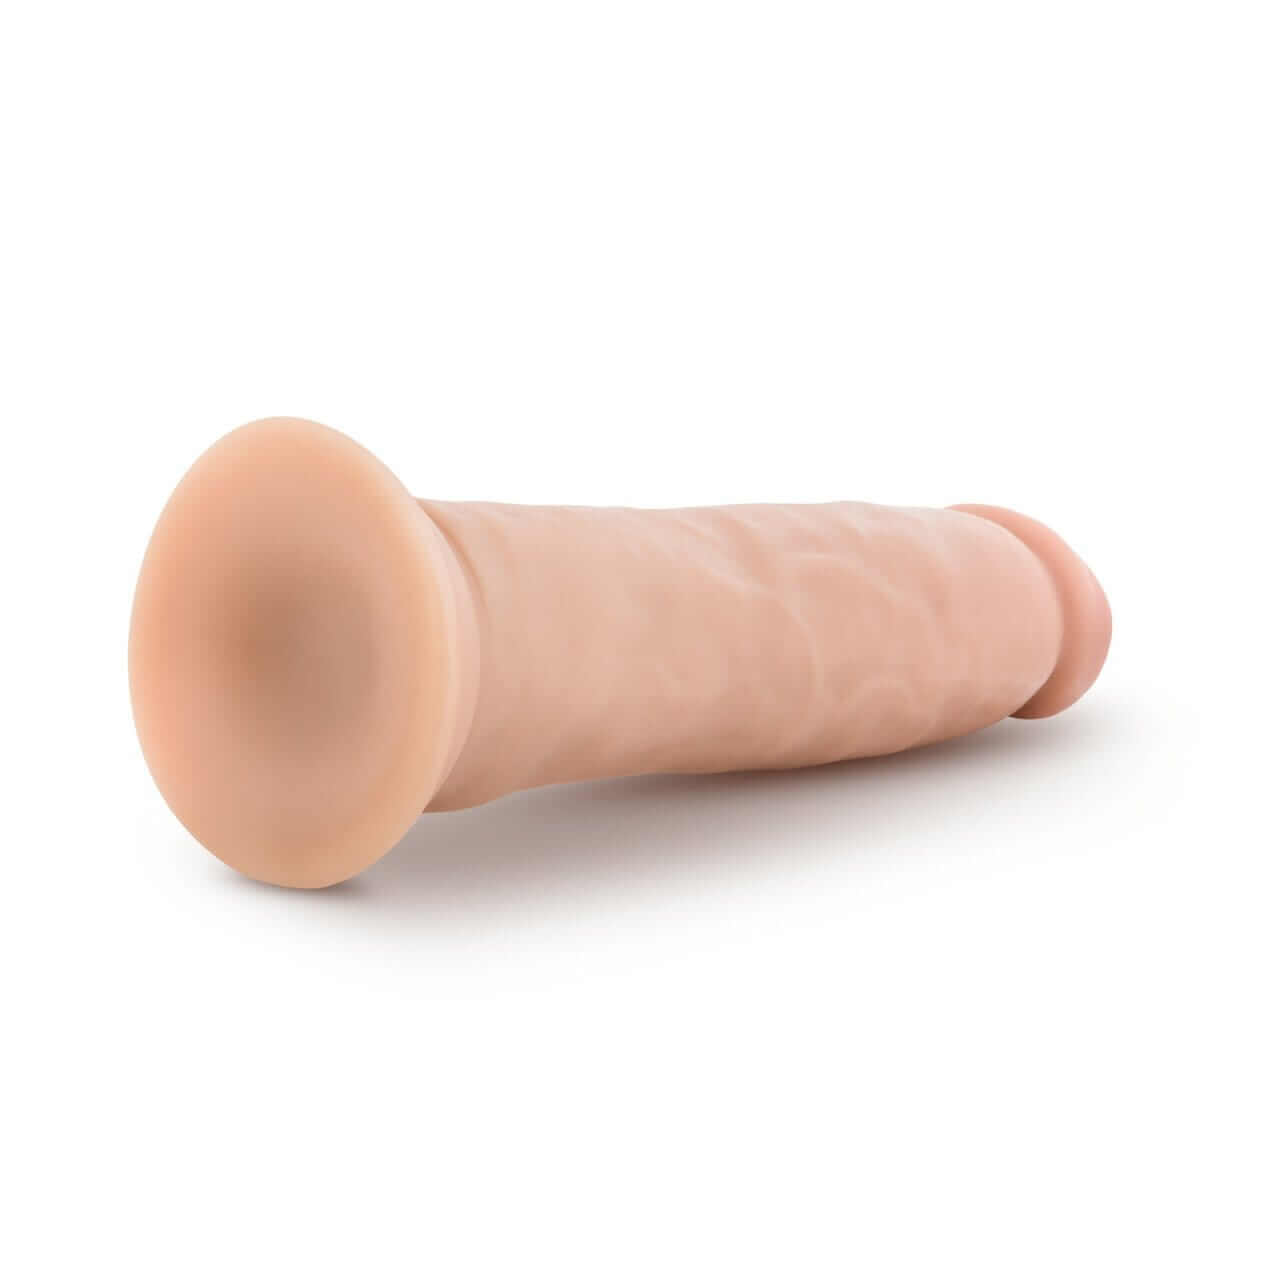 Dr. Skin 9.5 Inch Cock - Vanilla - Thorn & Feather